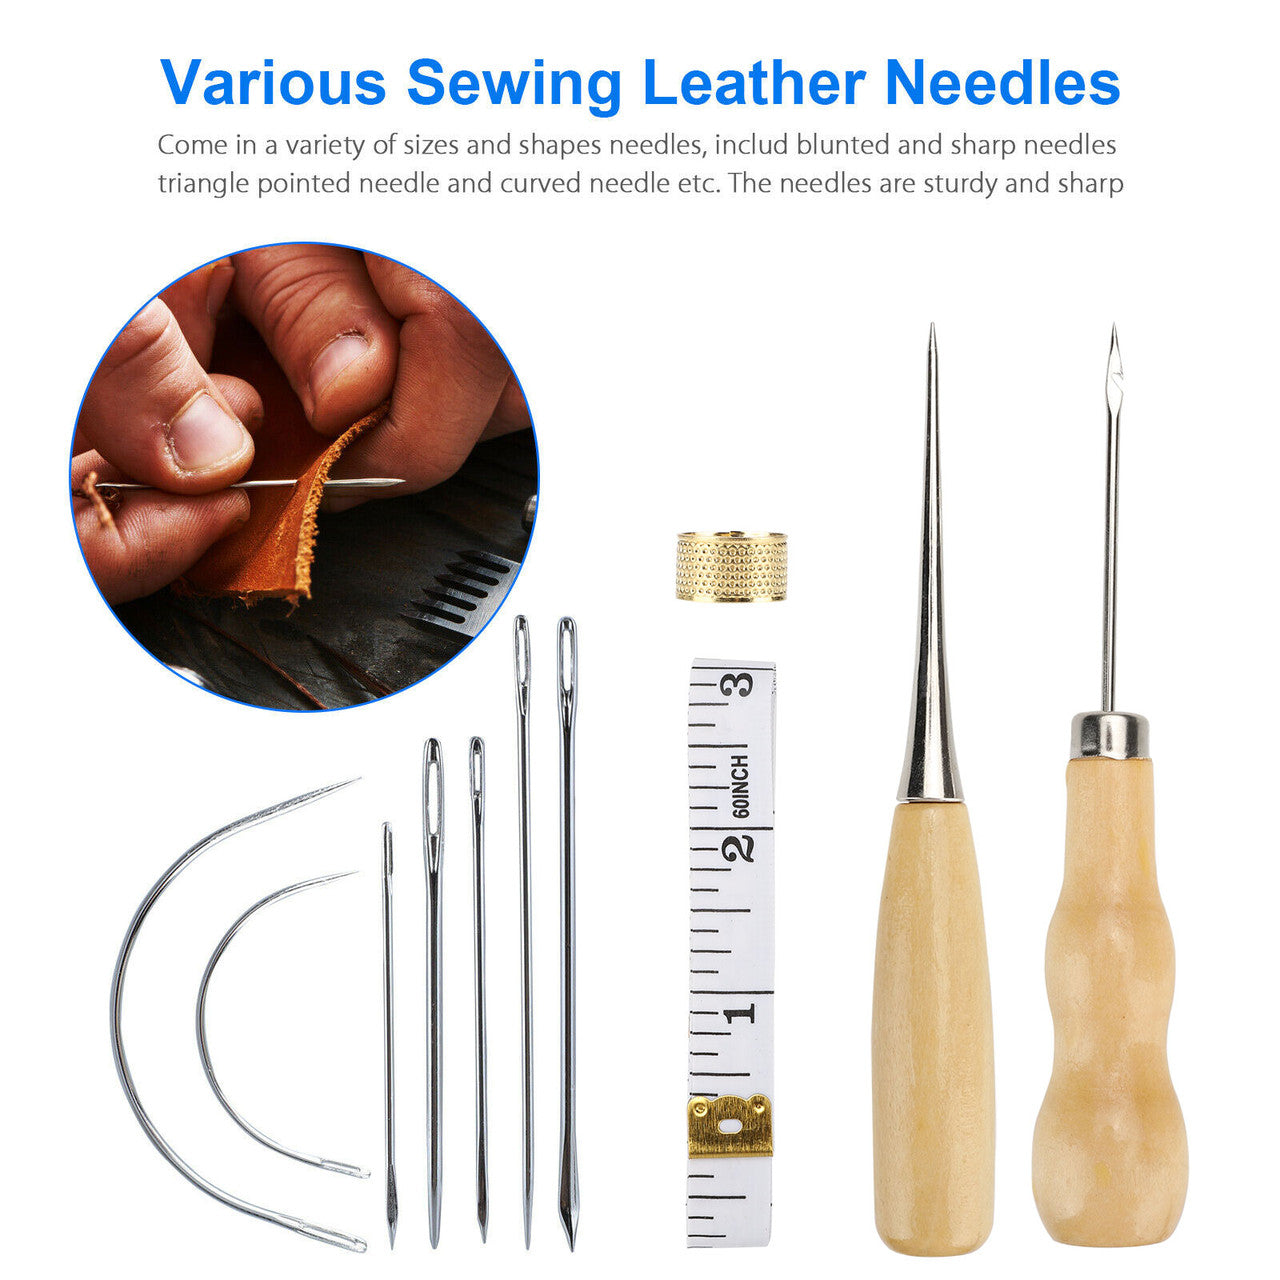 Leather Craft Tools, DIY Stitching Sewing Hand Tool, Upholstery Repair Kit with 7 Needles, 3 Color Threads, Drilling Awl for Stitching Punching Cutting Sewing Leather Craft Making, 24Pcs